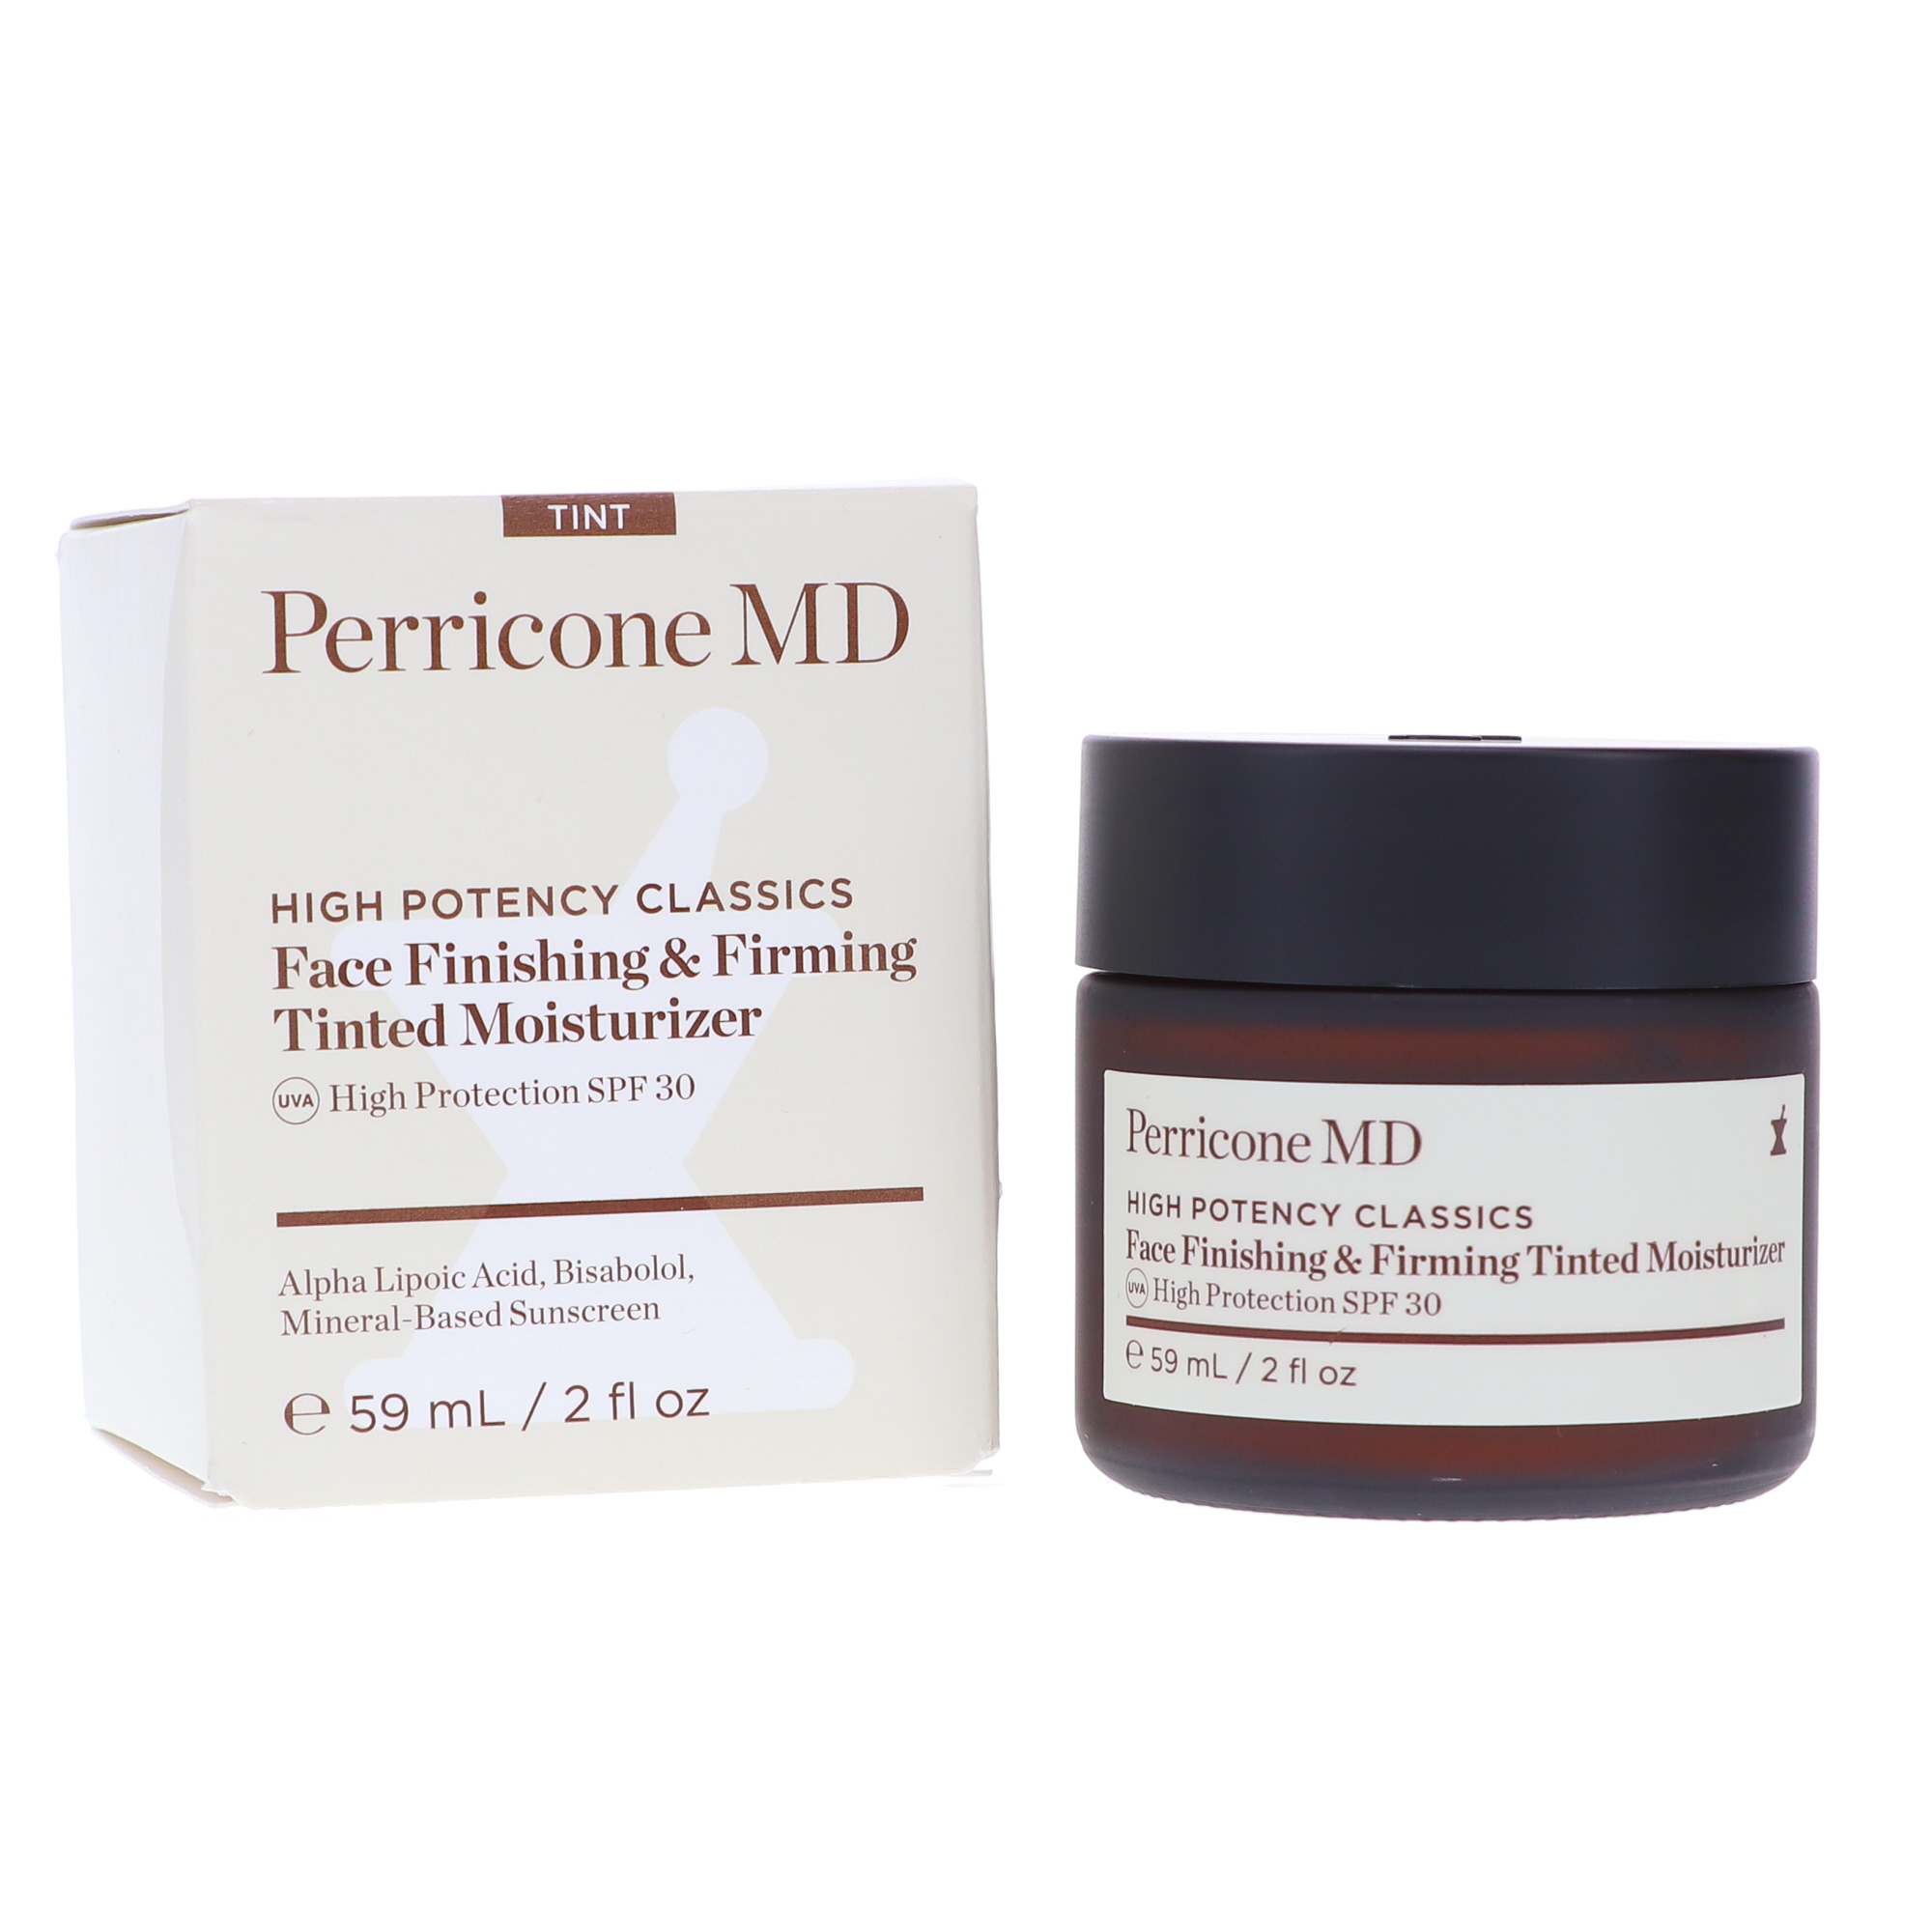 Perricone MD High Potency Classics Face Finishing & Firming Tinted  Moisturizer SPF 30, 2 oz.